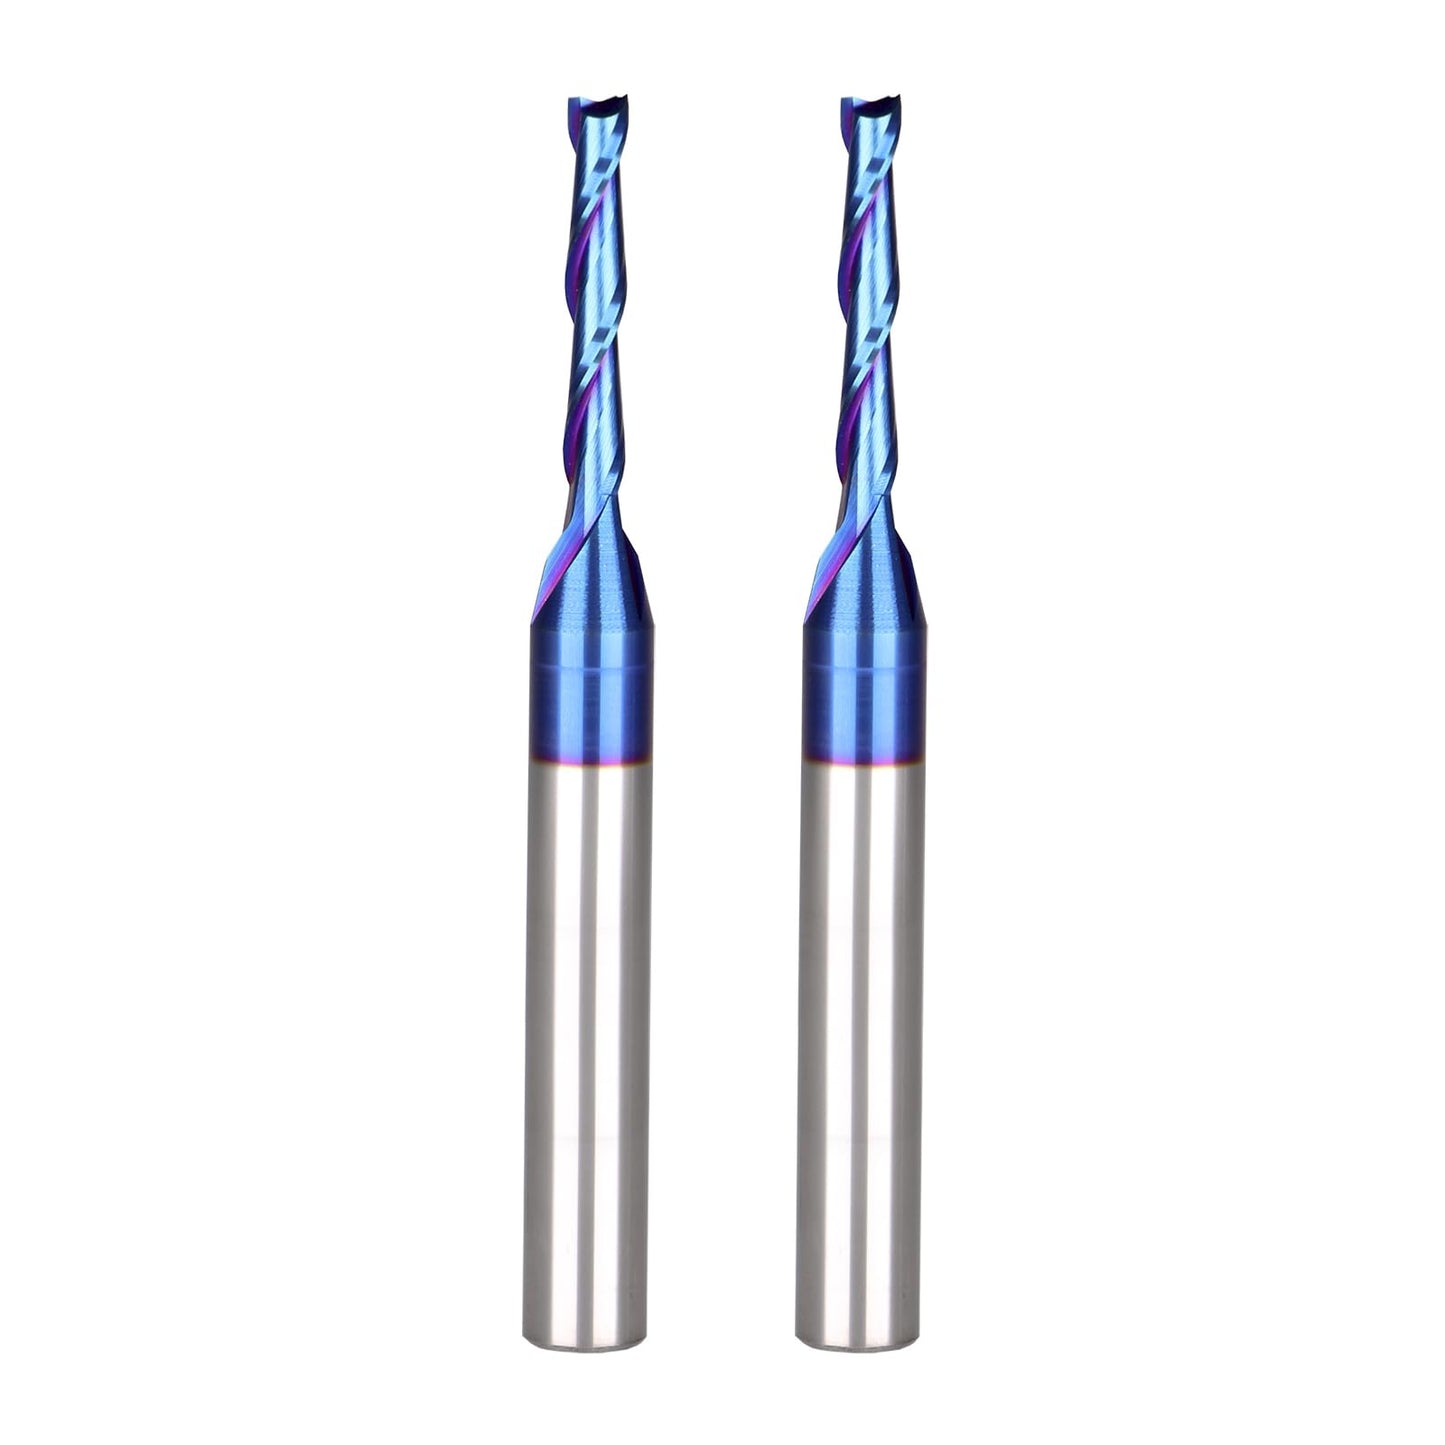 Jiiolioa 2PCS CNC Router Bits 1/4 Inch Shank 1/8 inch Cutting Diamete Spiral Up Cut End Mill with Nano Blue Coating for Carving Standard milling,